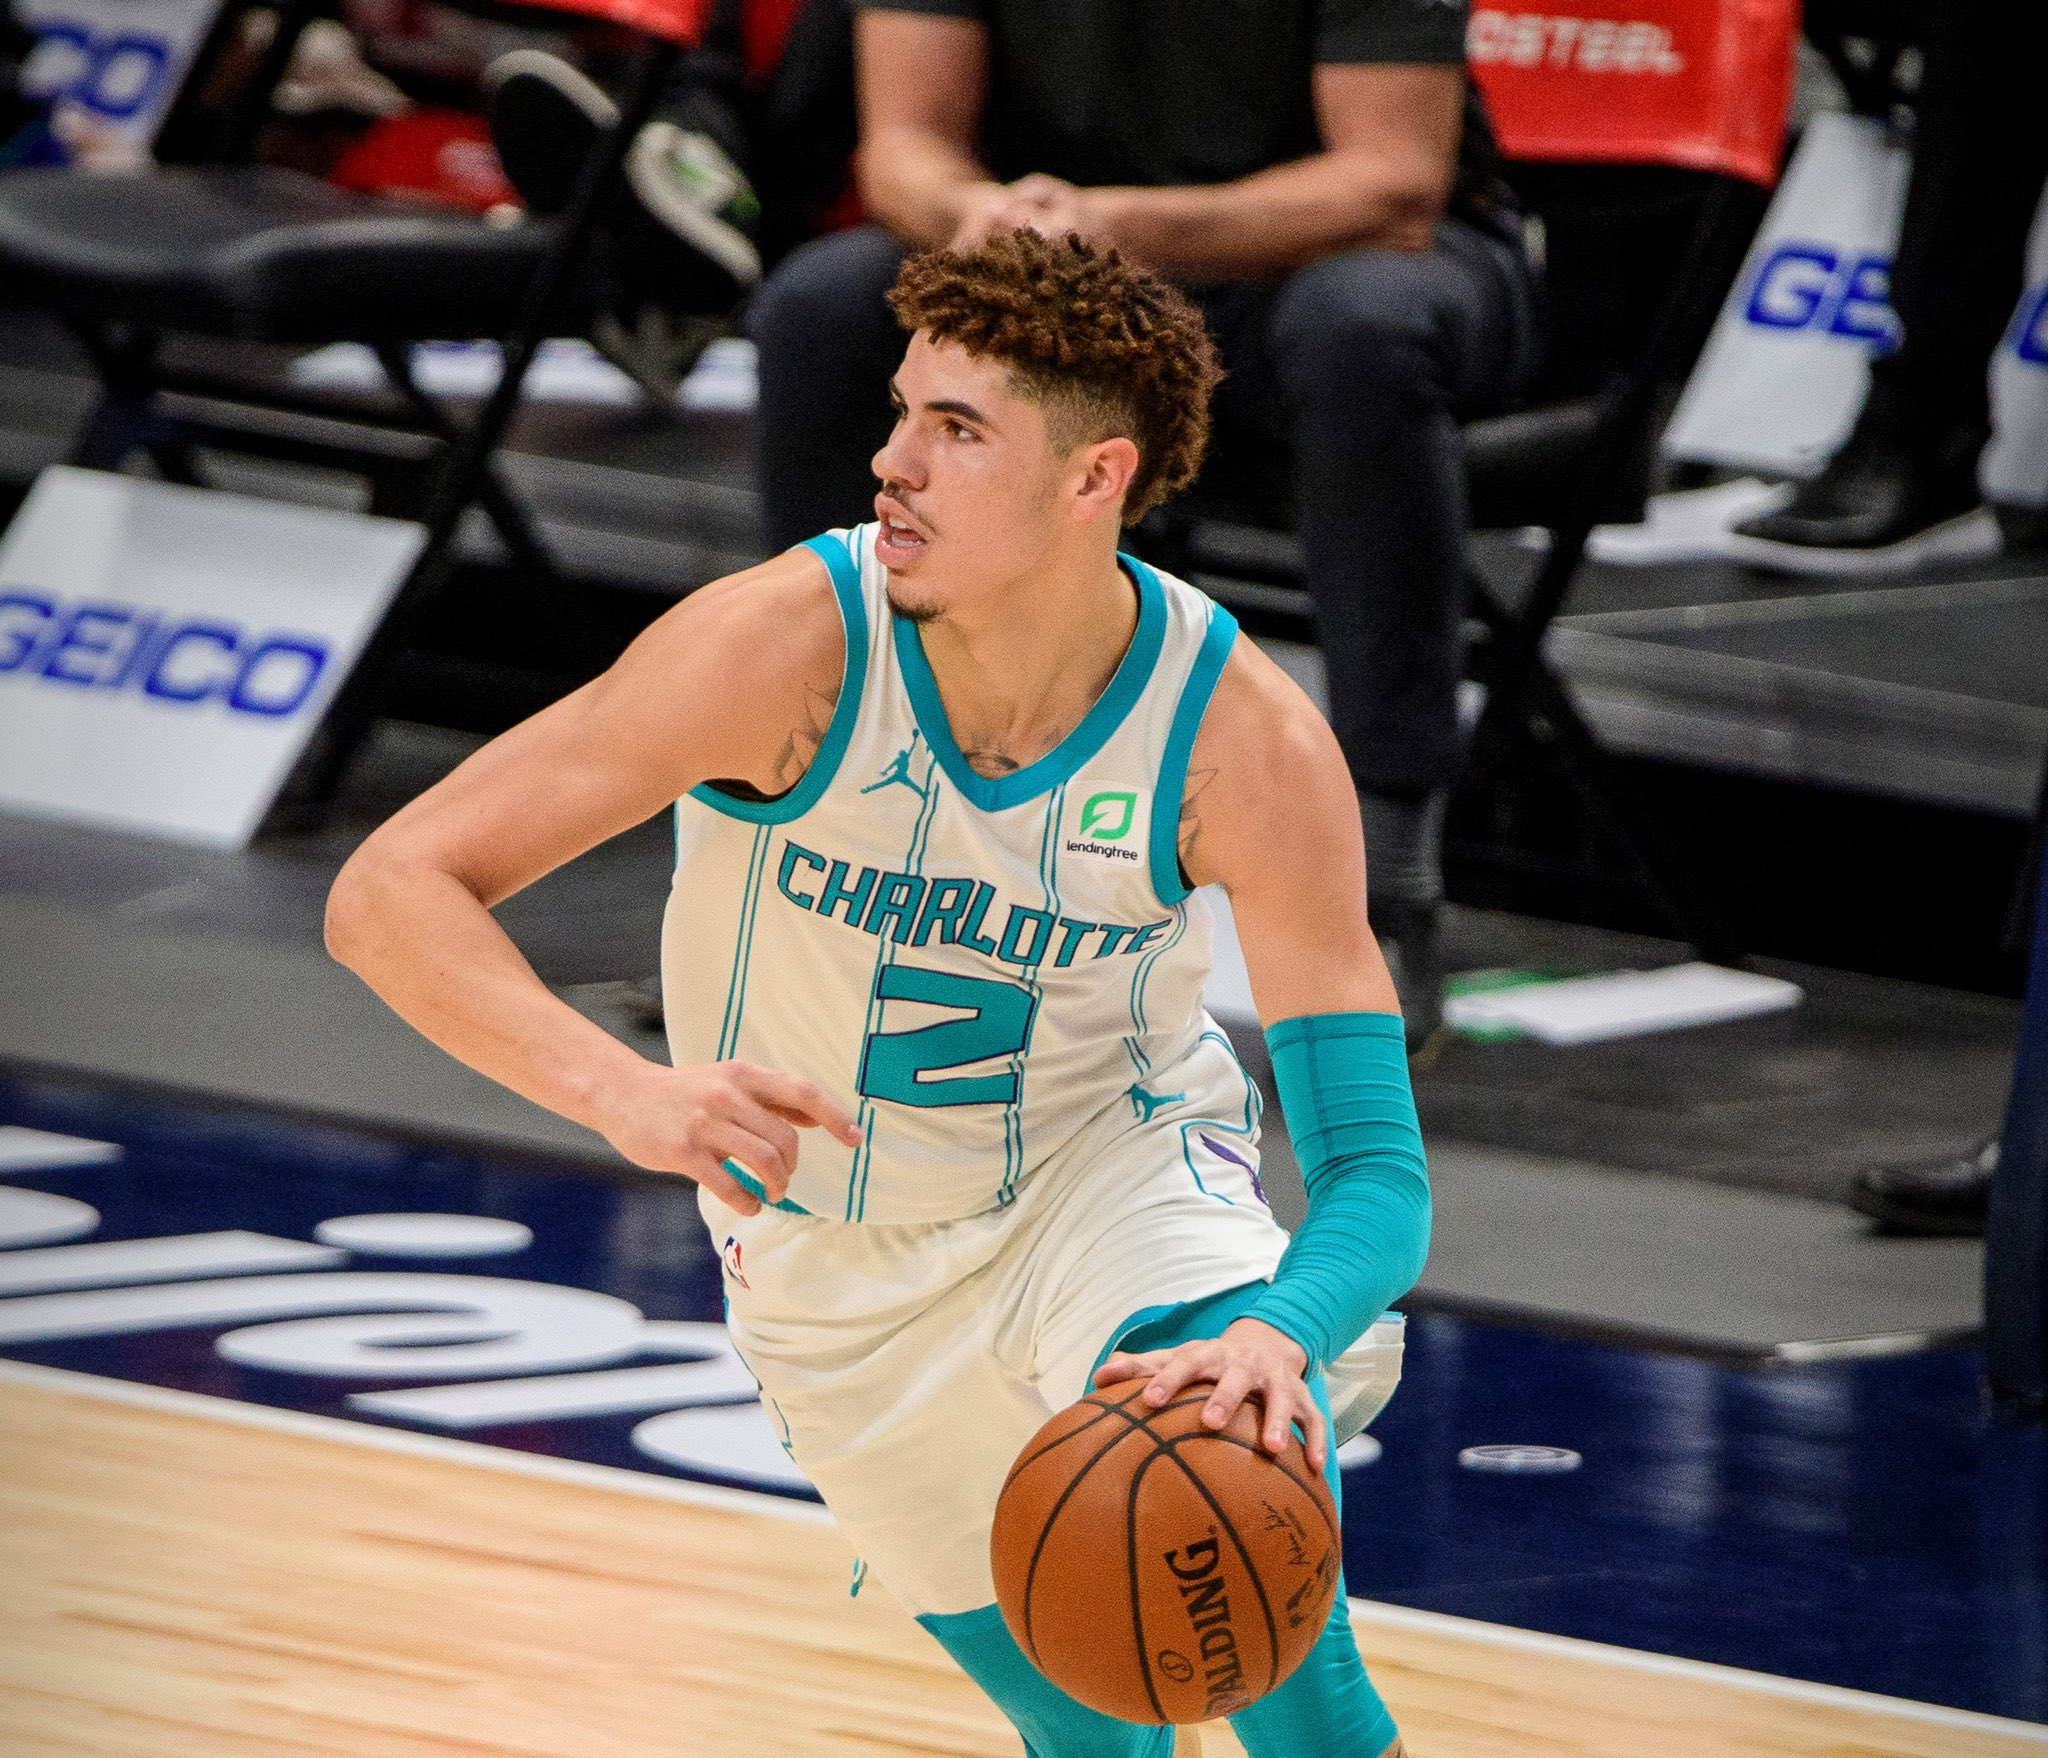 LaMelo Ball has a triple-double:21 PTS - 10 REB - 10 AST - 9/10 FG First of...